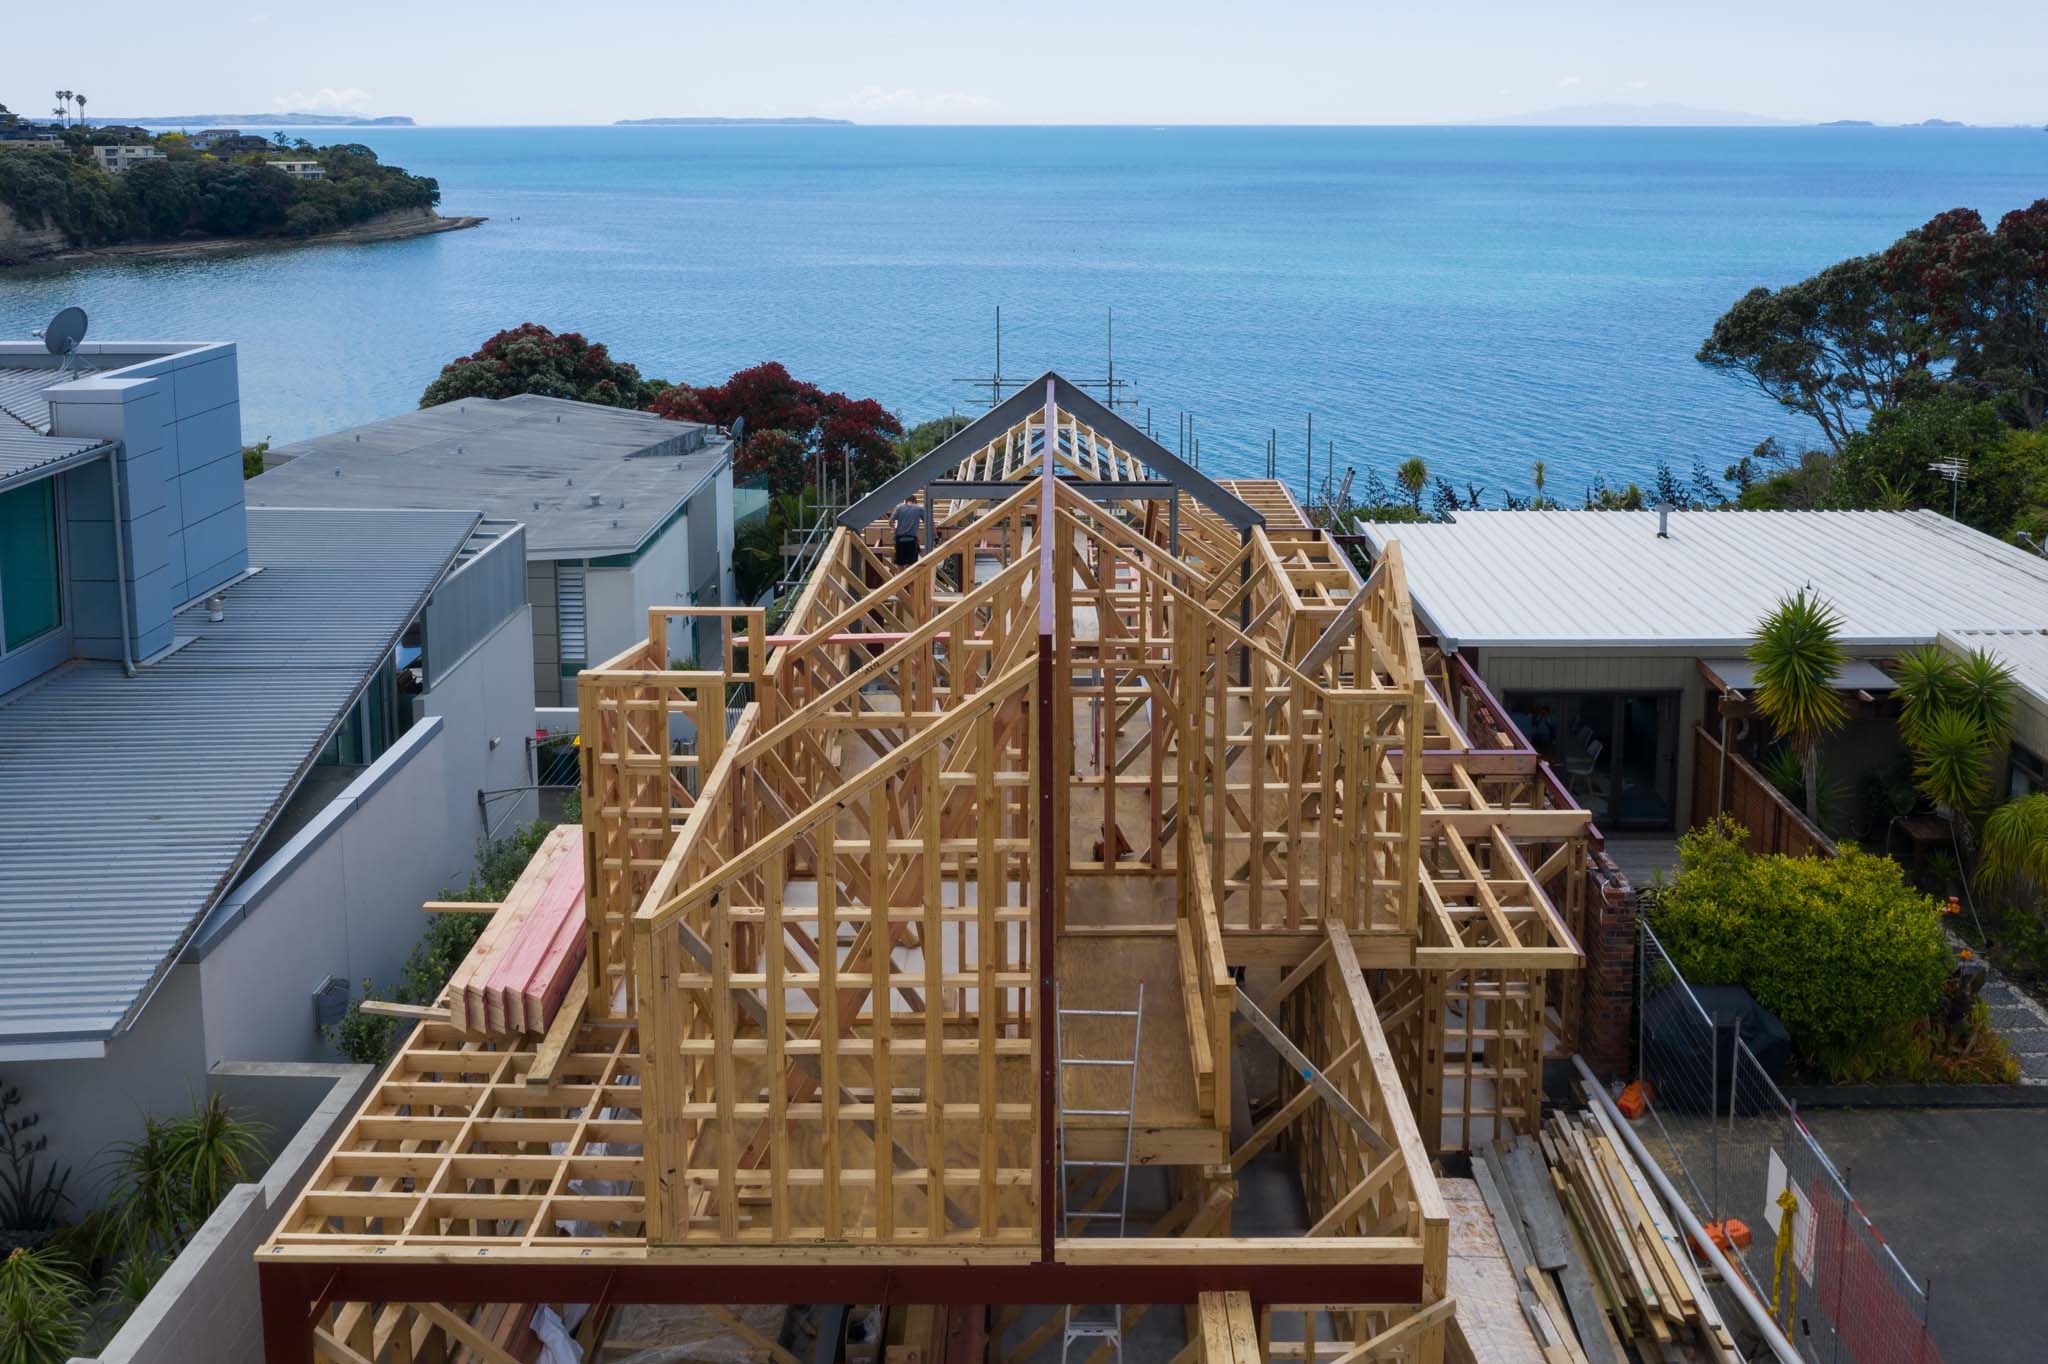 Architectural Cliff-Top Home – Bournemouth Terrace, Auckland